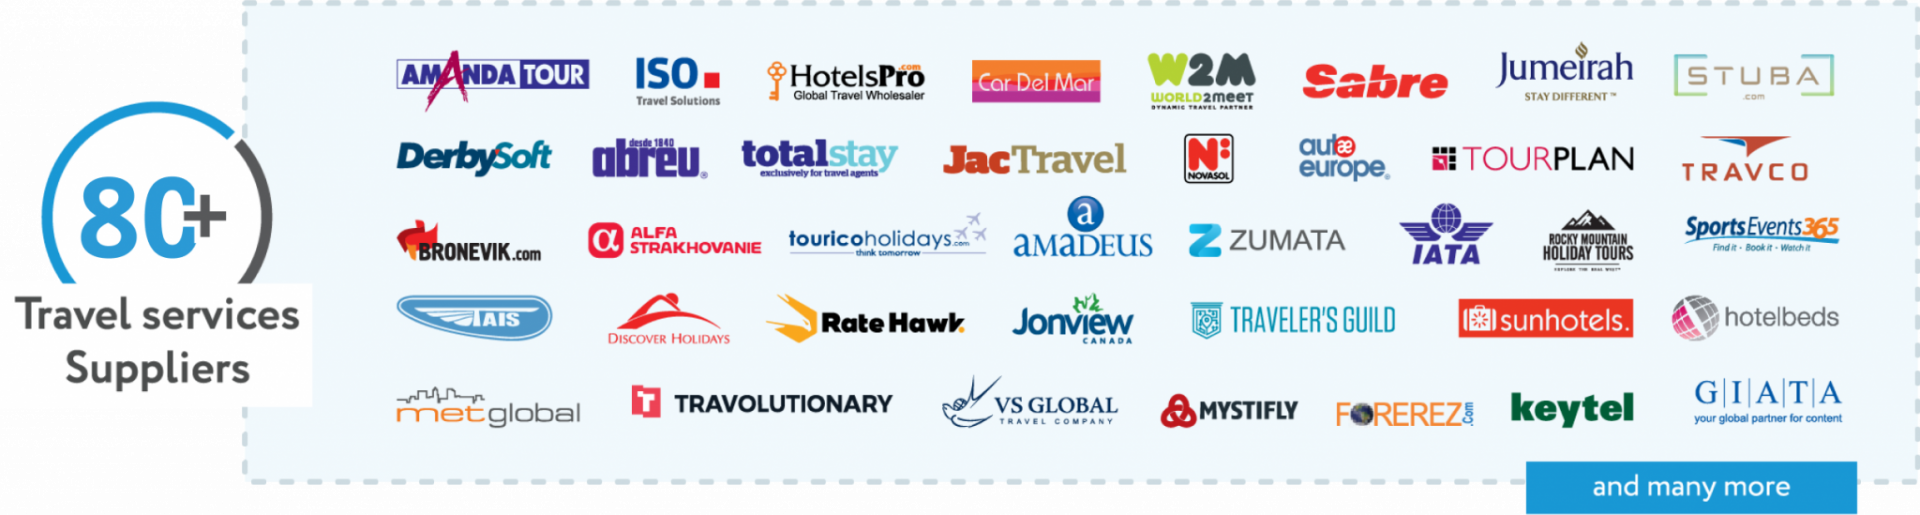 Travel suppliers